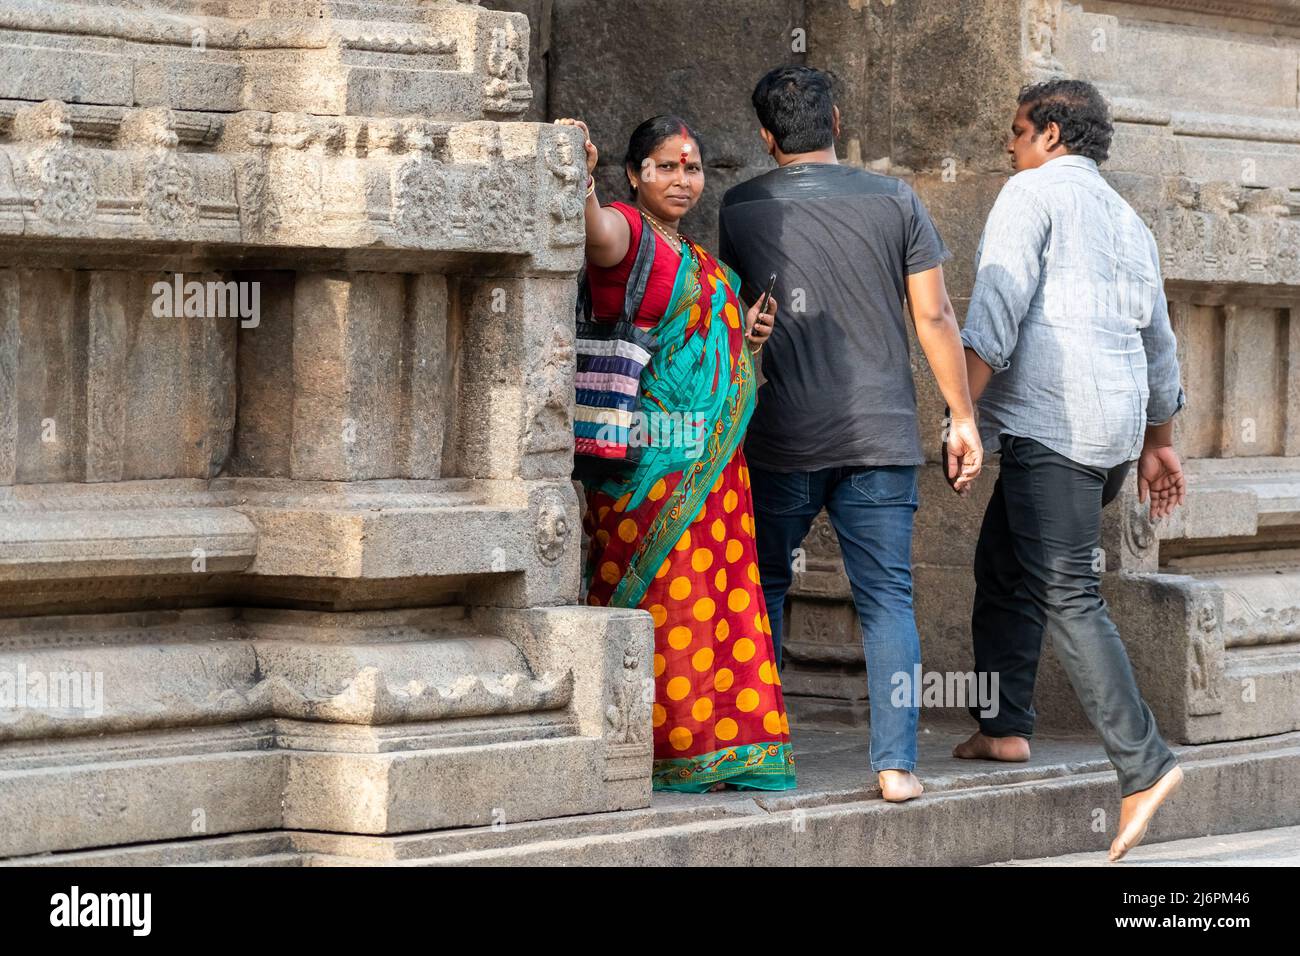 Vellore, Tamil Nadu, India - September 2018: An Indian woman wearing a red sari standing beside a wall at an ancient Hindu temple in the Vellore fort. Stock Photo